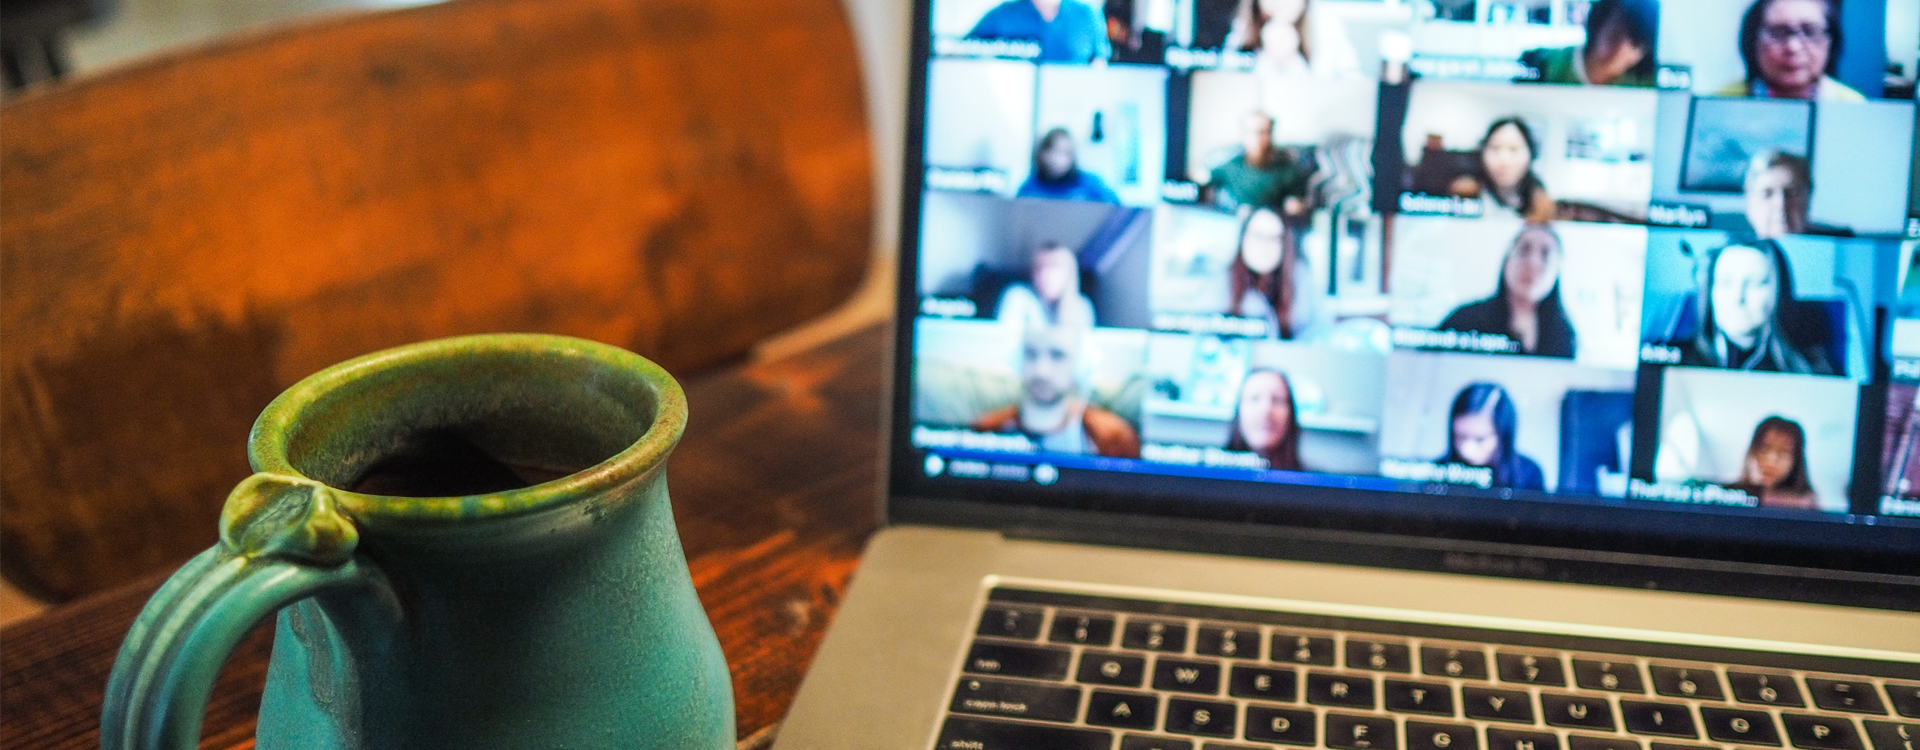 coffee cup next to a laptop with images of people in an online meeting